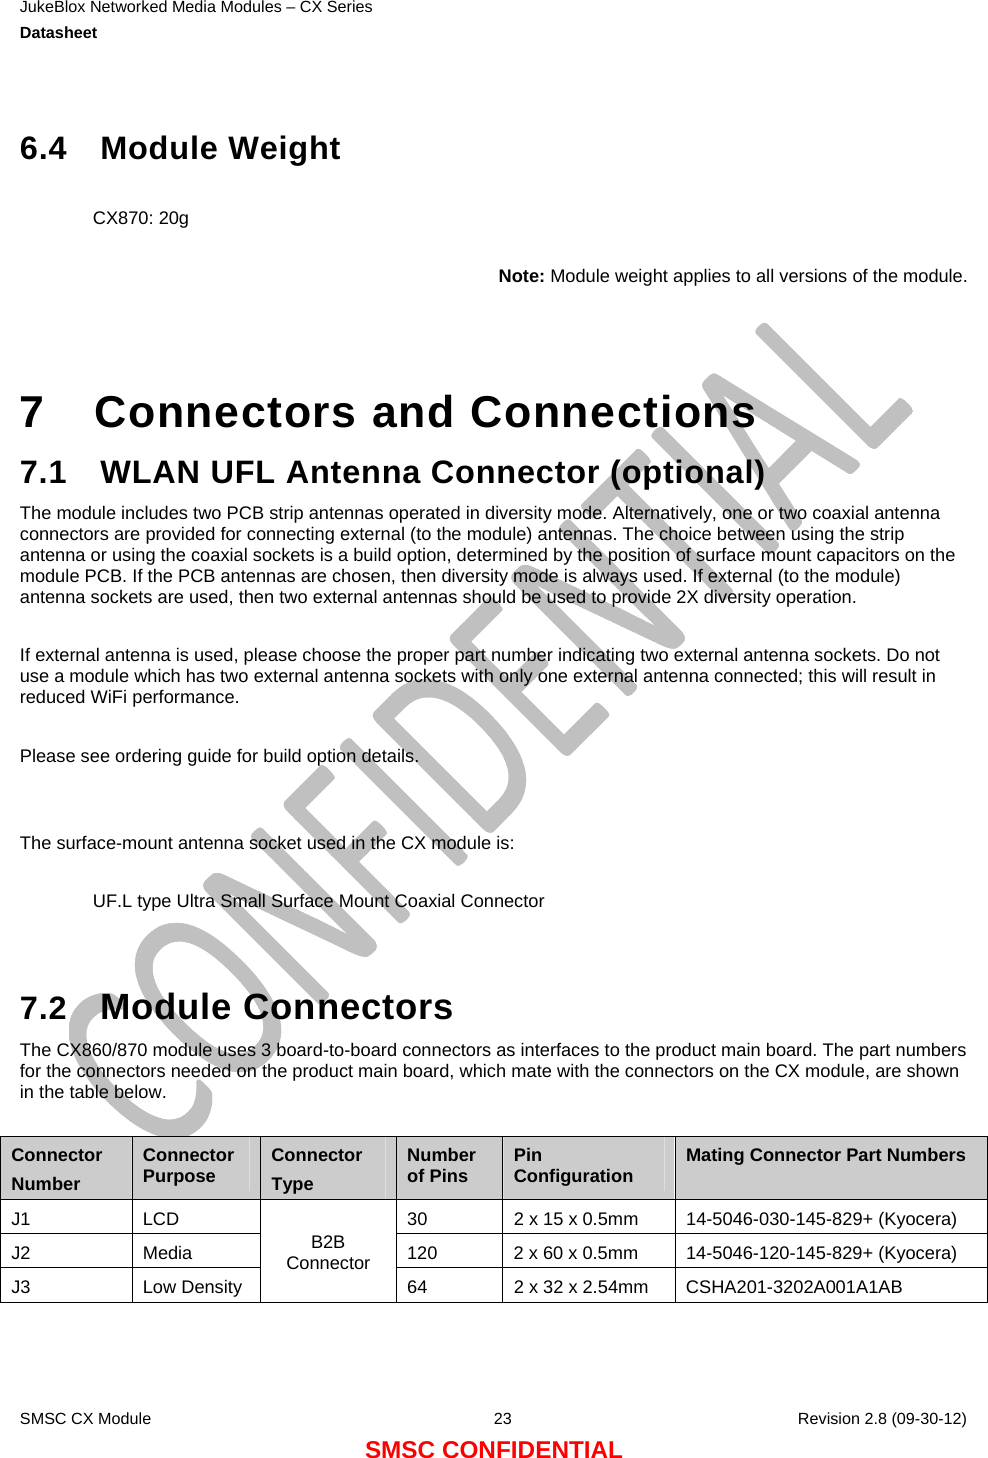 JukeBlox Networked Media Modules – CX Series  Datasheet    SMSC CX Module  23    Revision 2.8 (09-30-12) SMSC CONFIDENTIAL  6.4 Module Weight  CX870: 20g  Note: Module weight applies to all versions of the module.    7  Connectors and Connections 7.1  WLAN UFL Antenna Connector (optional) The module includes two PCB strip antennas operated in diversity mode. Alternatively, one or two coaxial antenna connectors are provided for connecting external (to the module) antennas. The choice between using the strip antenna or using the coaxial sockets is a build option, determined by the position of surface mount capacitors on the module PCB. If the PCB antennas are chosen, then diversity mode is always used. If external (to the module) antenna sockets are used, then two external antennas should be used to provide 2X diversity operation.  If external antenna is used, please choose the proper part number indicating two external antenna sockets. Do not use a module which has two external antenna sockets with only one external antenna connected; this will result in reduced WiFi performance.  Please see ordering guide for build option details.   The surface-mount antenna socket used in the CX module is:  UF.L type Ultra Small Surface Mount Coaxial Connector   7.2  Module Connectors The CX860/870 module uses 3 board-to-board connectors as interfaces to the product main board. The part numbers for the connectors needed on the product main board, which mate with the connectors on the CX module, are shown in the table below.  Connector Number Connector Purpose  Connector Type Number of Pins  Pin Configuration  Mating Connector Part Numbers J1  LCD  30  2 x 15 x 0.5mm  14-5046-030-145-829+ (Kyocera) J2  Media  120  2 x 60 x 0.5mm  14-5046-120-145-829+ (Kyocera) J3 Low DensityB2B Connector 64  2 x 32 x 2.54mm  CSHA201-3202A001A1AB  